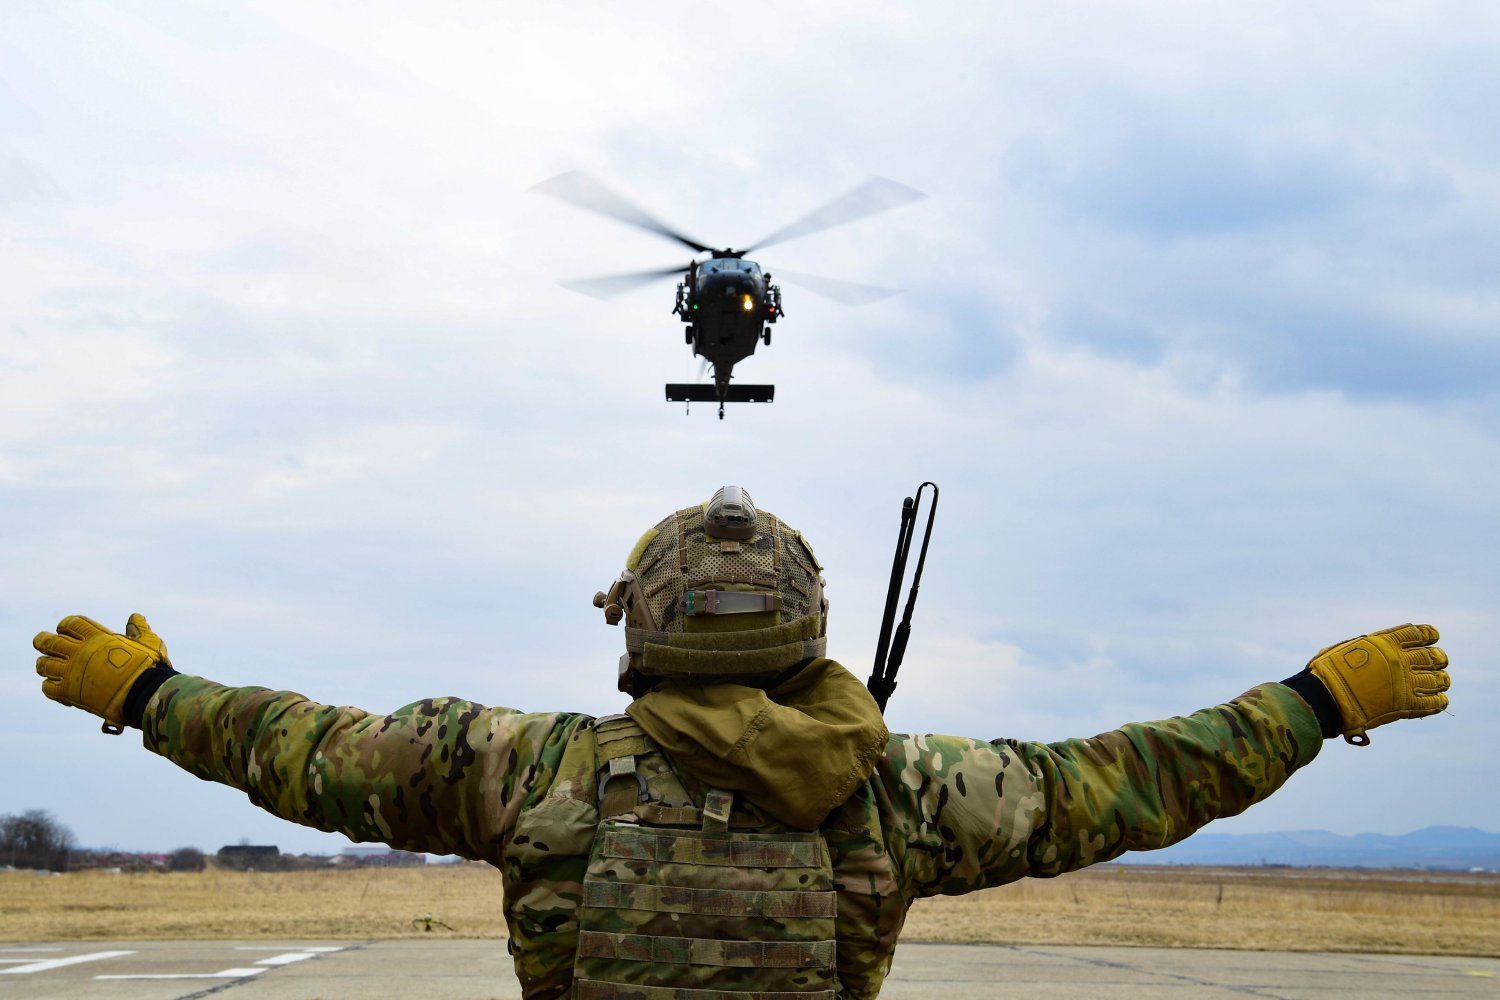 A US Air Force pararescueman assigned to the 57th Rescue Squadron performs dynamic hoist training with an HH-60G Pave Hawk helicopter in Romania on Wednesday March 9, 2022 during joint training missions with the Romanian air force in support of the NATO alliance. The U.S. military ordered the deployment of 500 additional troops to Europe, pushing the total number of American forces on the continent to about 100,000 as it seeks to deter Russia from broadening its unprovoked war in Ukraine, Pentagon officials said Monday. (US DOD/EYEPRESS)